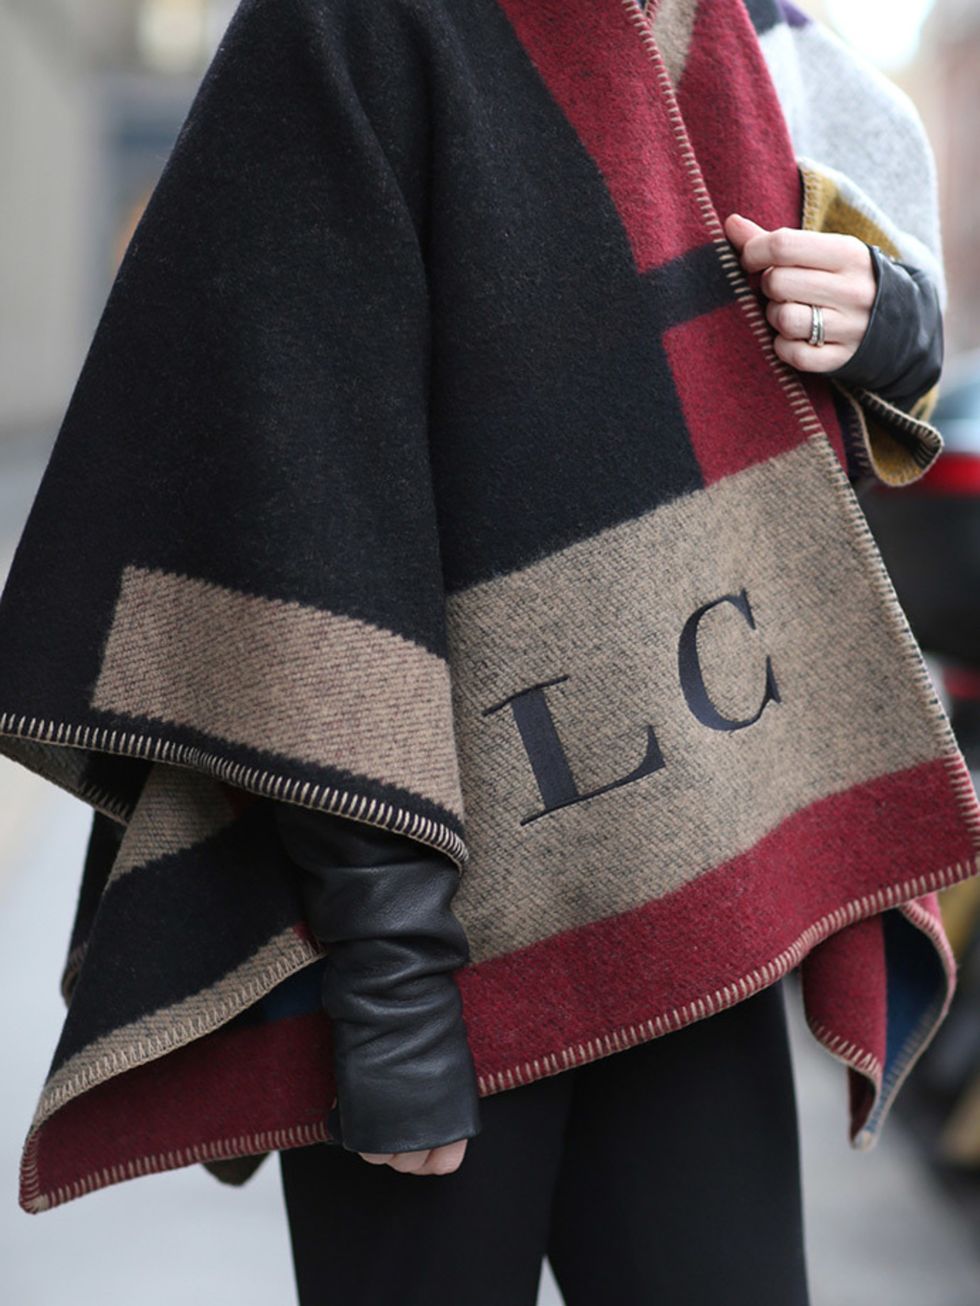 <p>Lorraine Candy - Editor-in-Chief</p>

<p>Burberry blanket and Rick Owens leather jacket.</p>